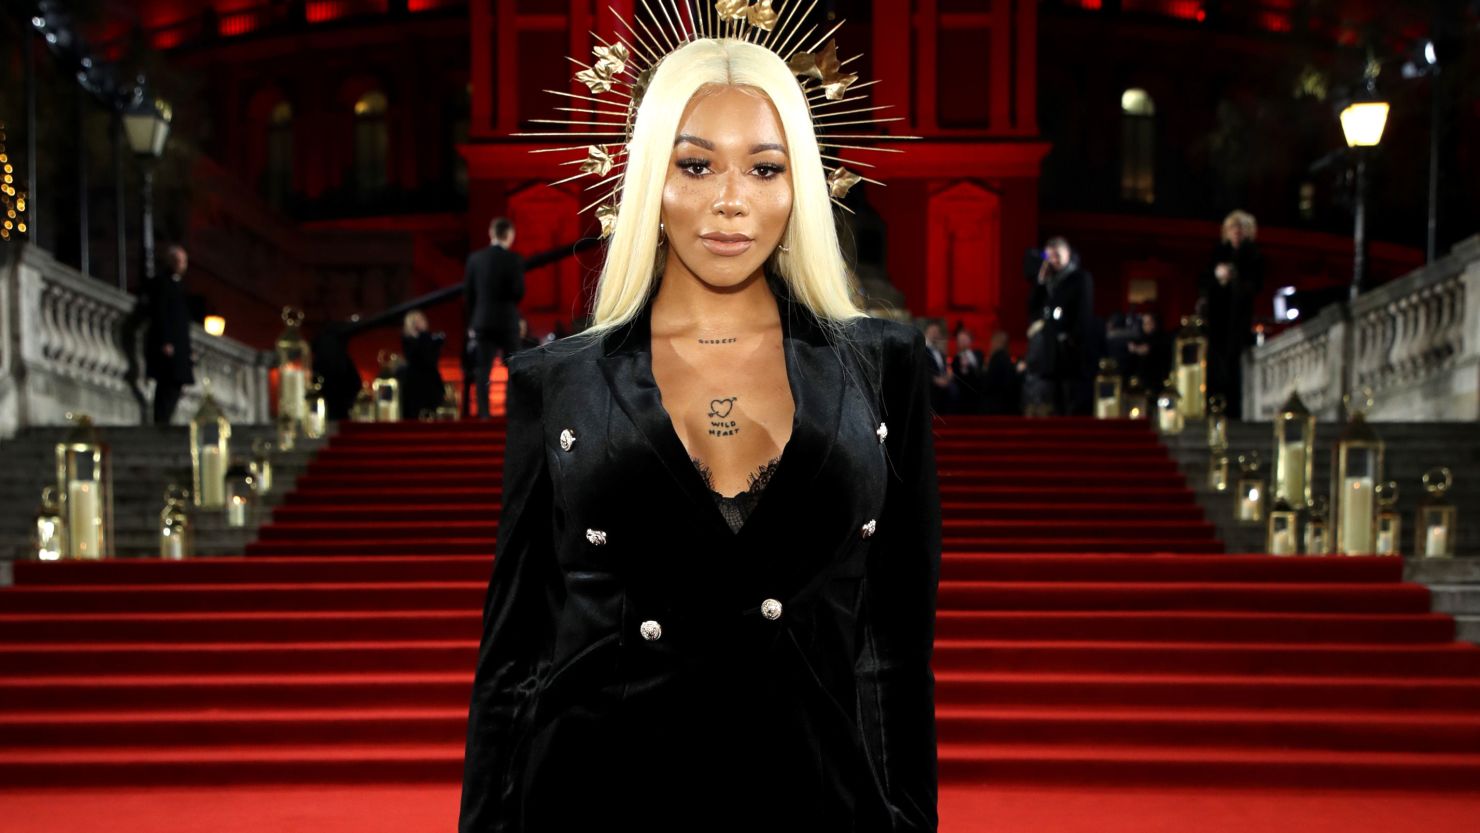 L'Oreal has asked model Munroe Bergdorf to advise the company on diversity and inclusion.